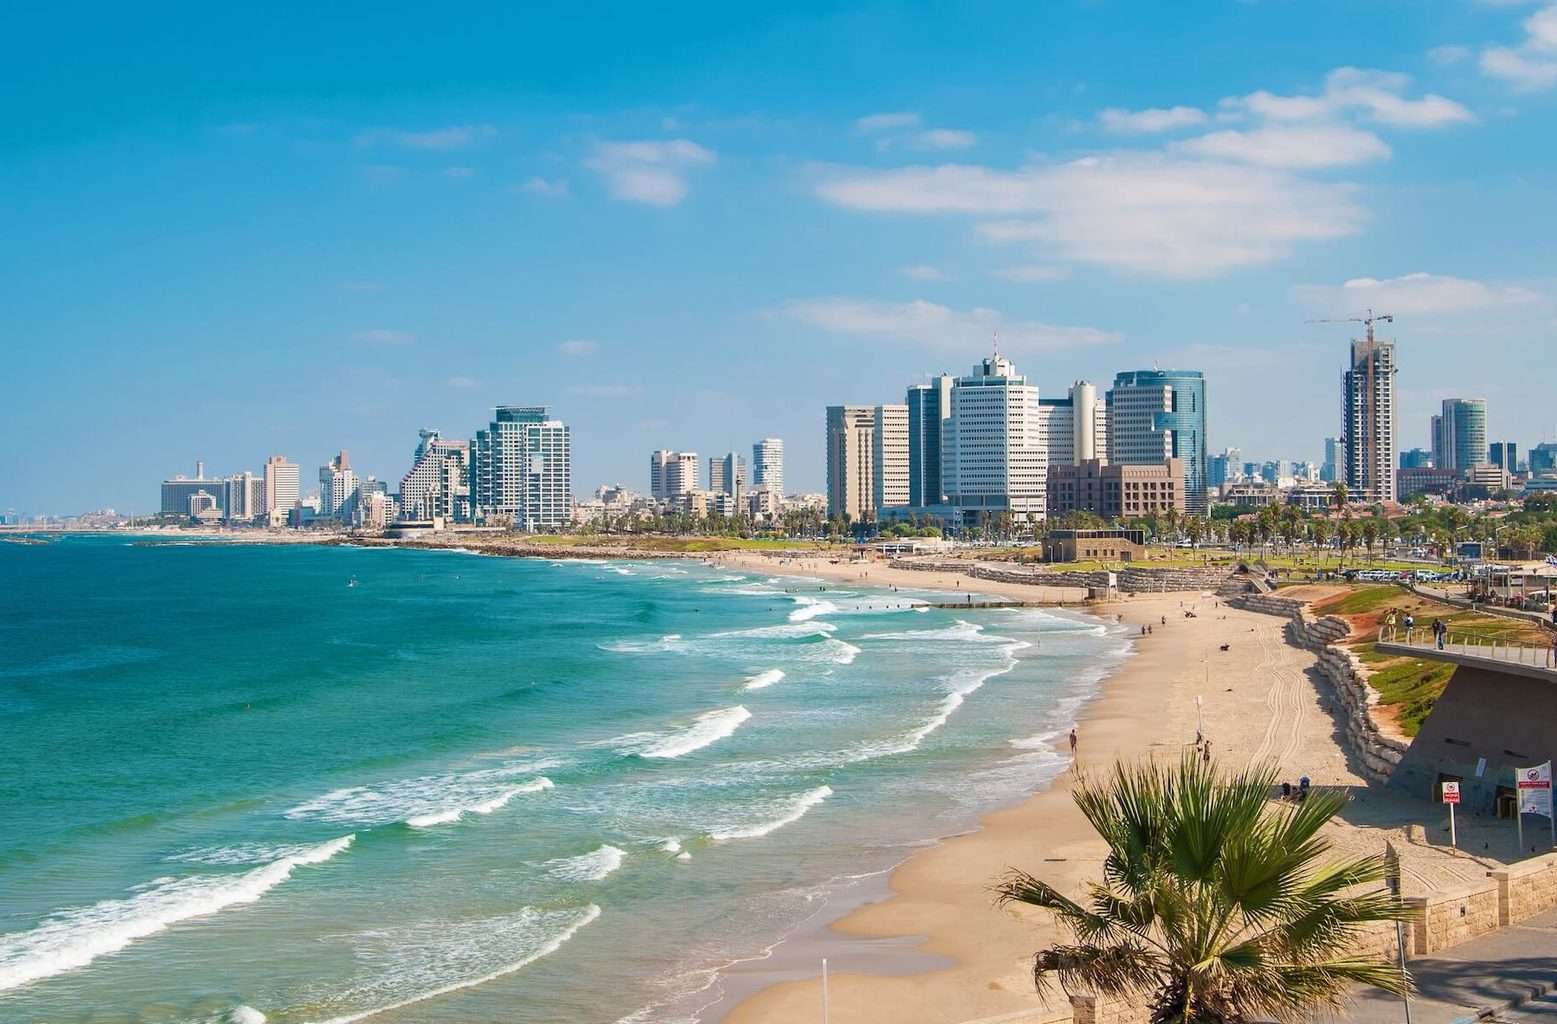 Tel Aviv holidays - beach and ocean view with city in background